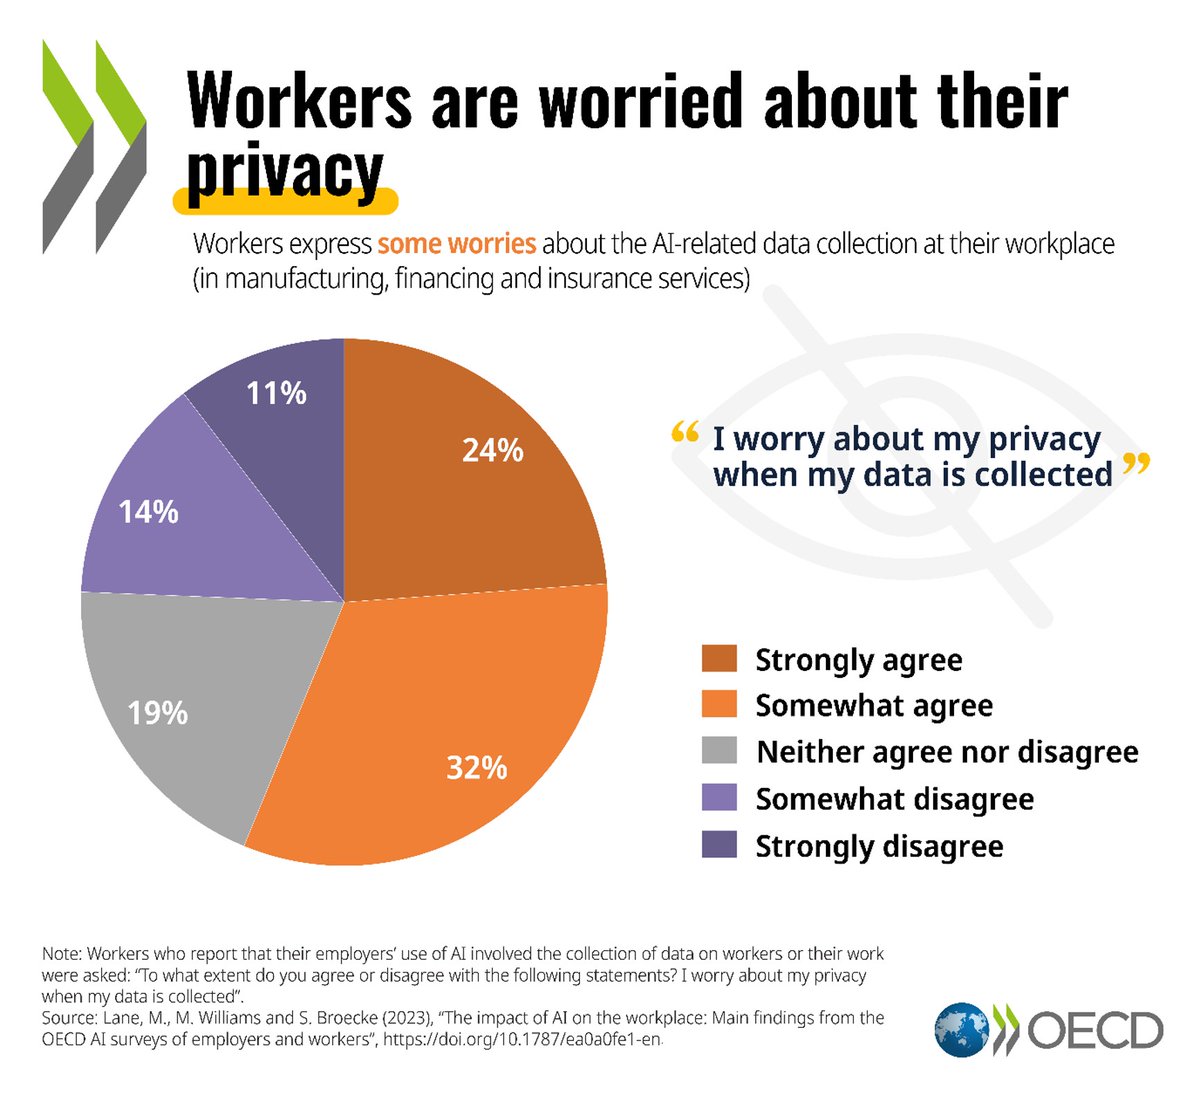 AI can bring great benefits to the workplace.

However, 56% of workers in manufacturing, finance, and insurance worry about their privacy.

Learn about the risks that need to be addressed when using #AI in the workplace: brnw.ch/21wJm9A | #WorkersDay #OECDAI